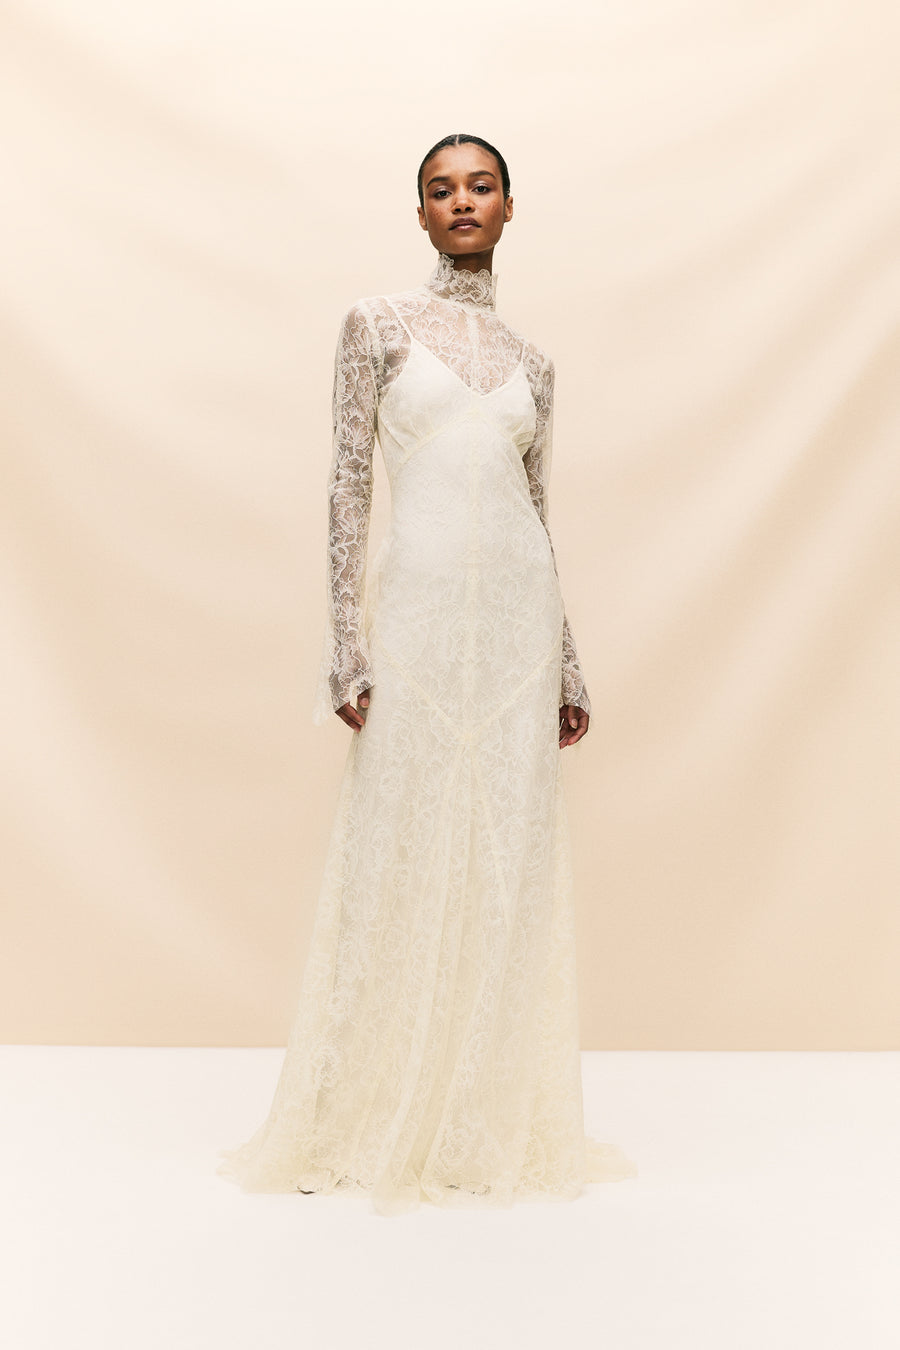 HERMOSA MAXI DRESS IN IVORY LACE